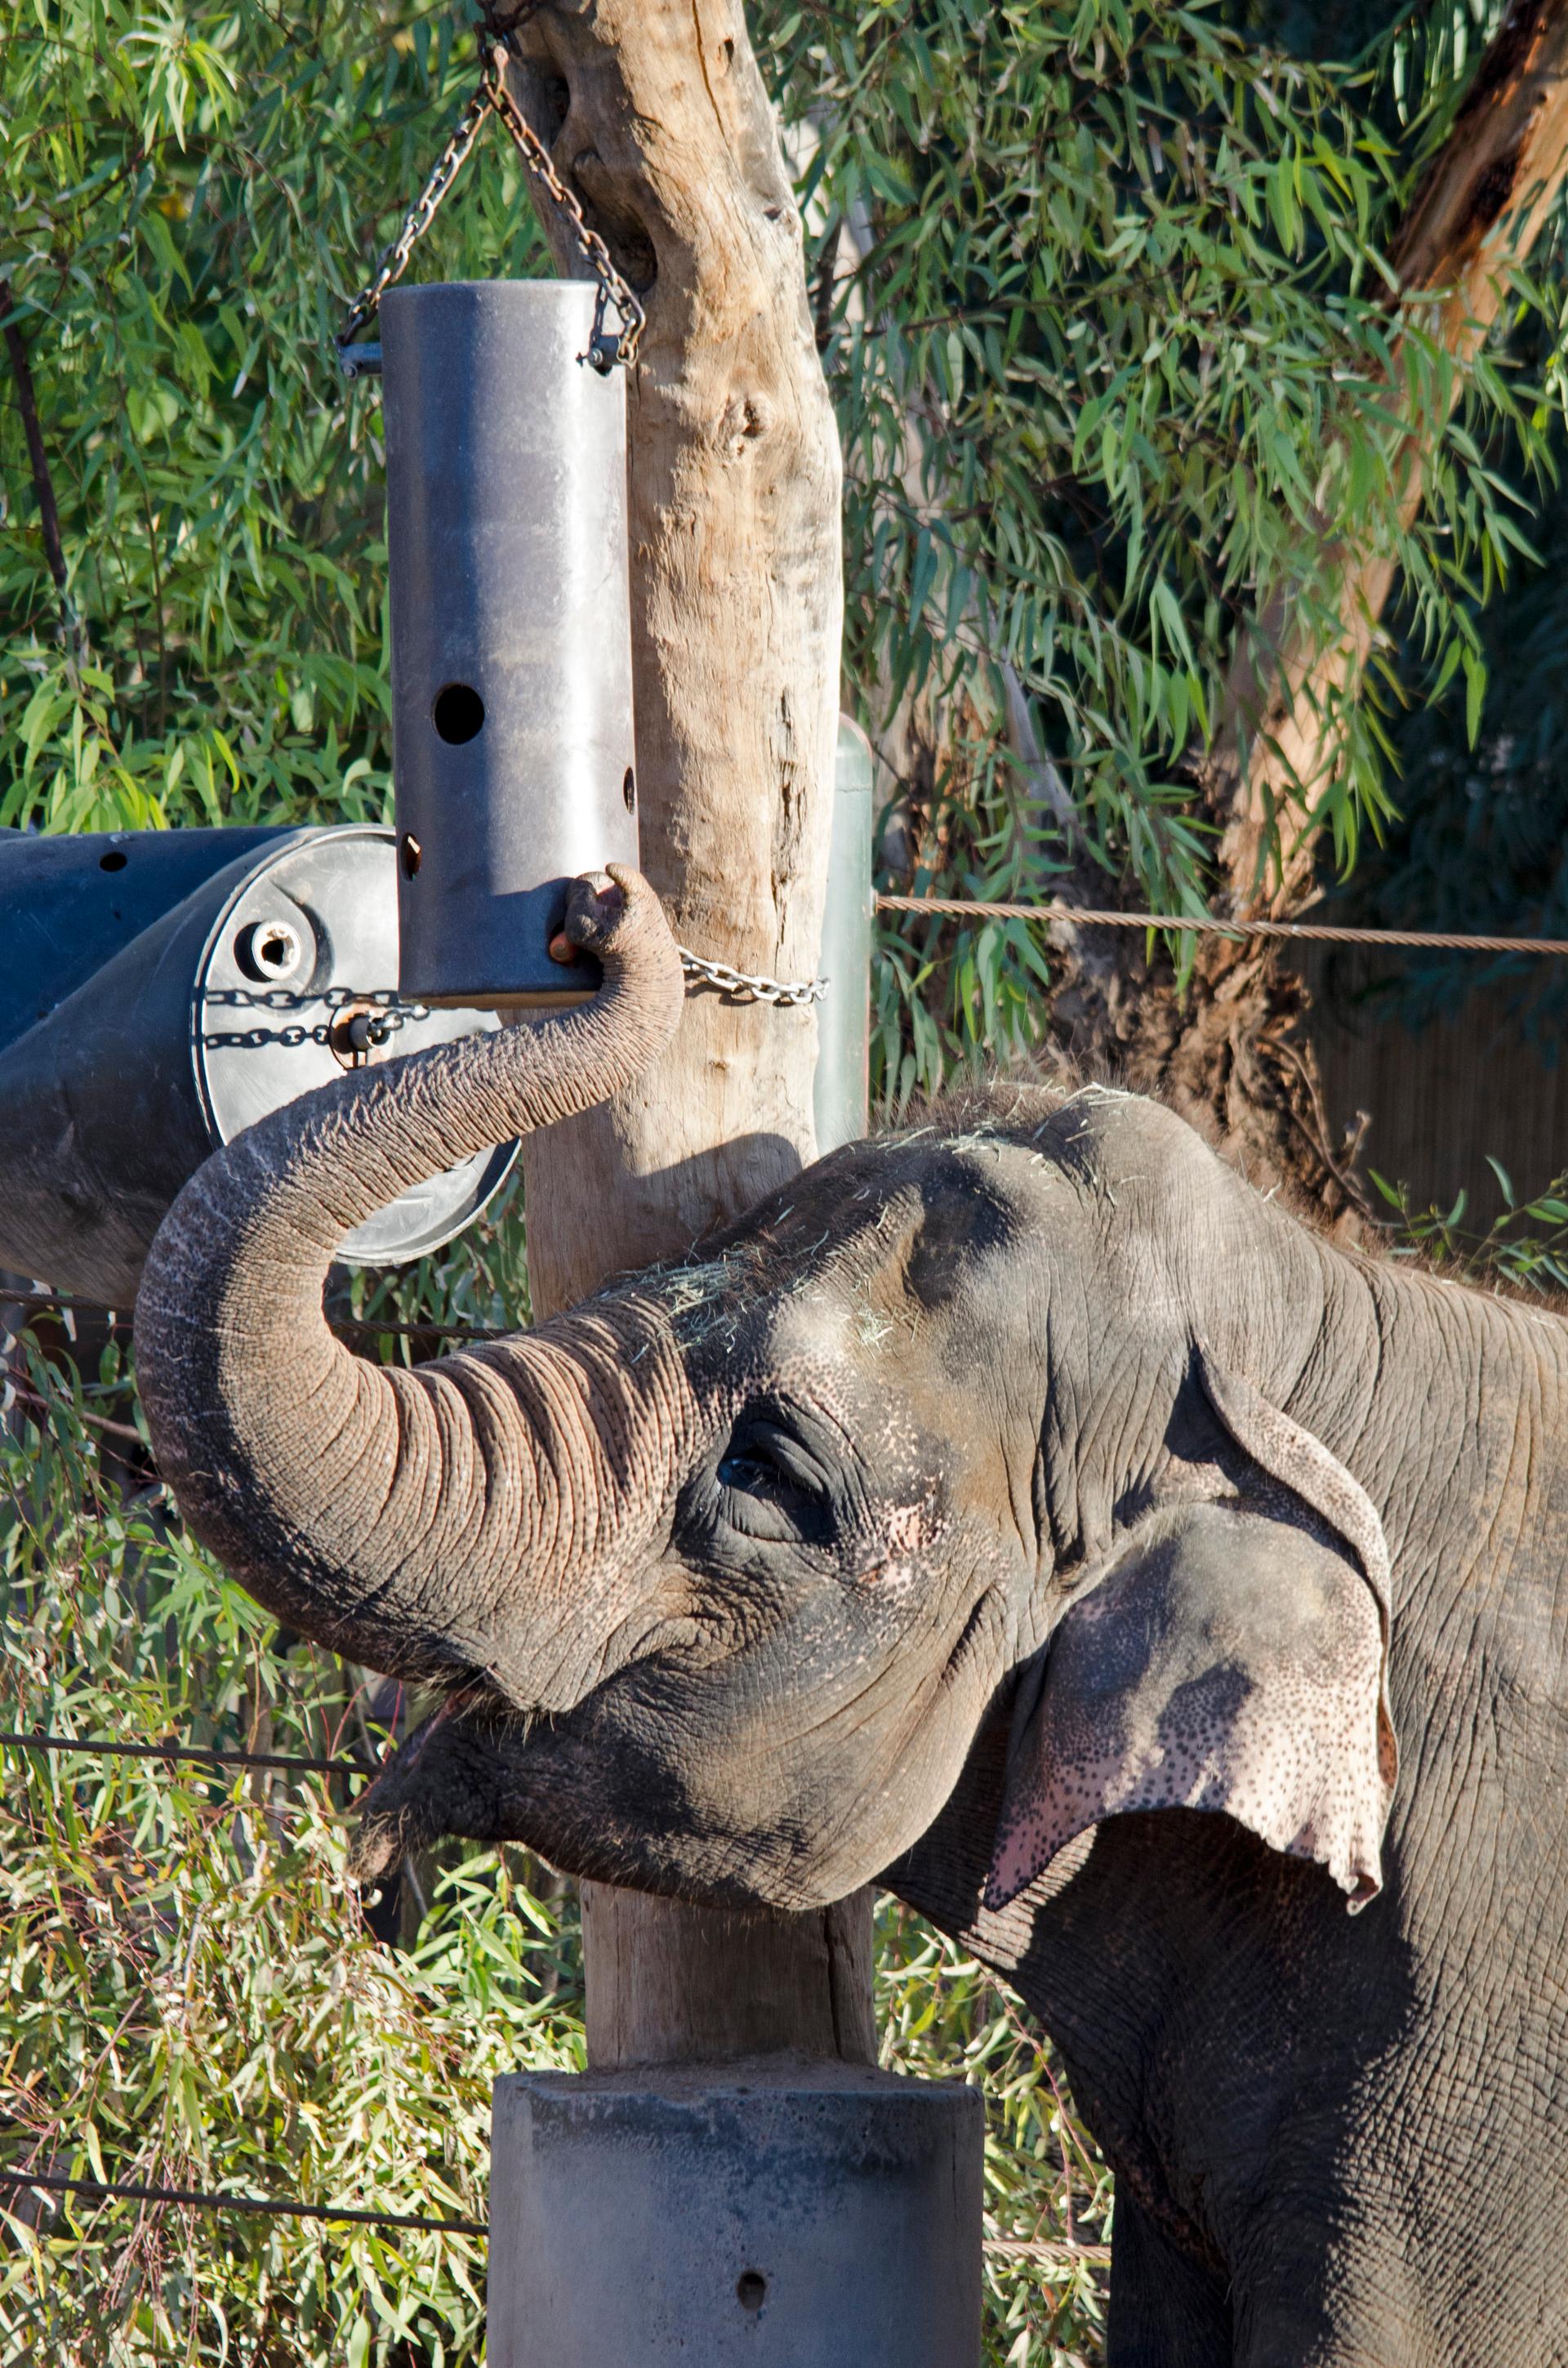 An elephant at the Phoenix Zoo getting a snack from a puzzle feeder.